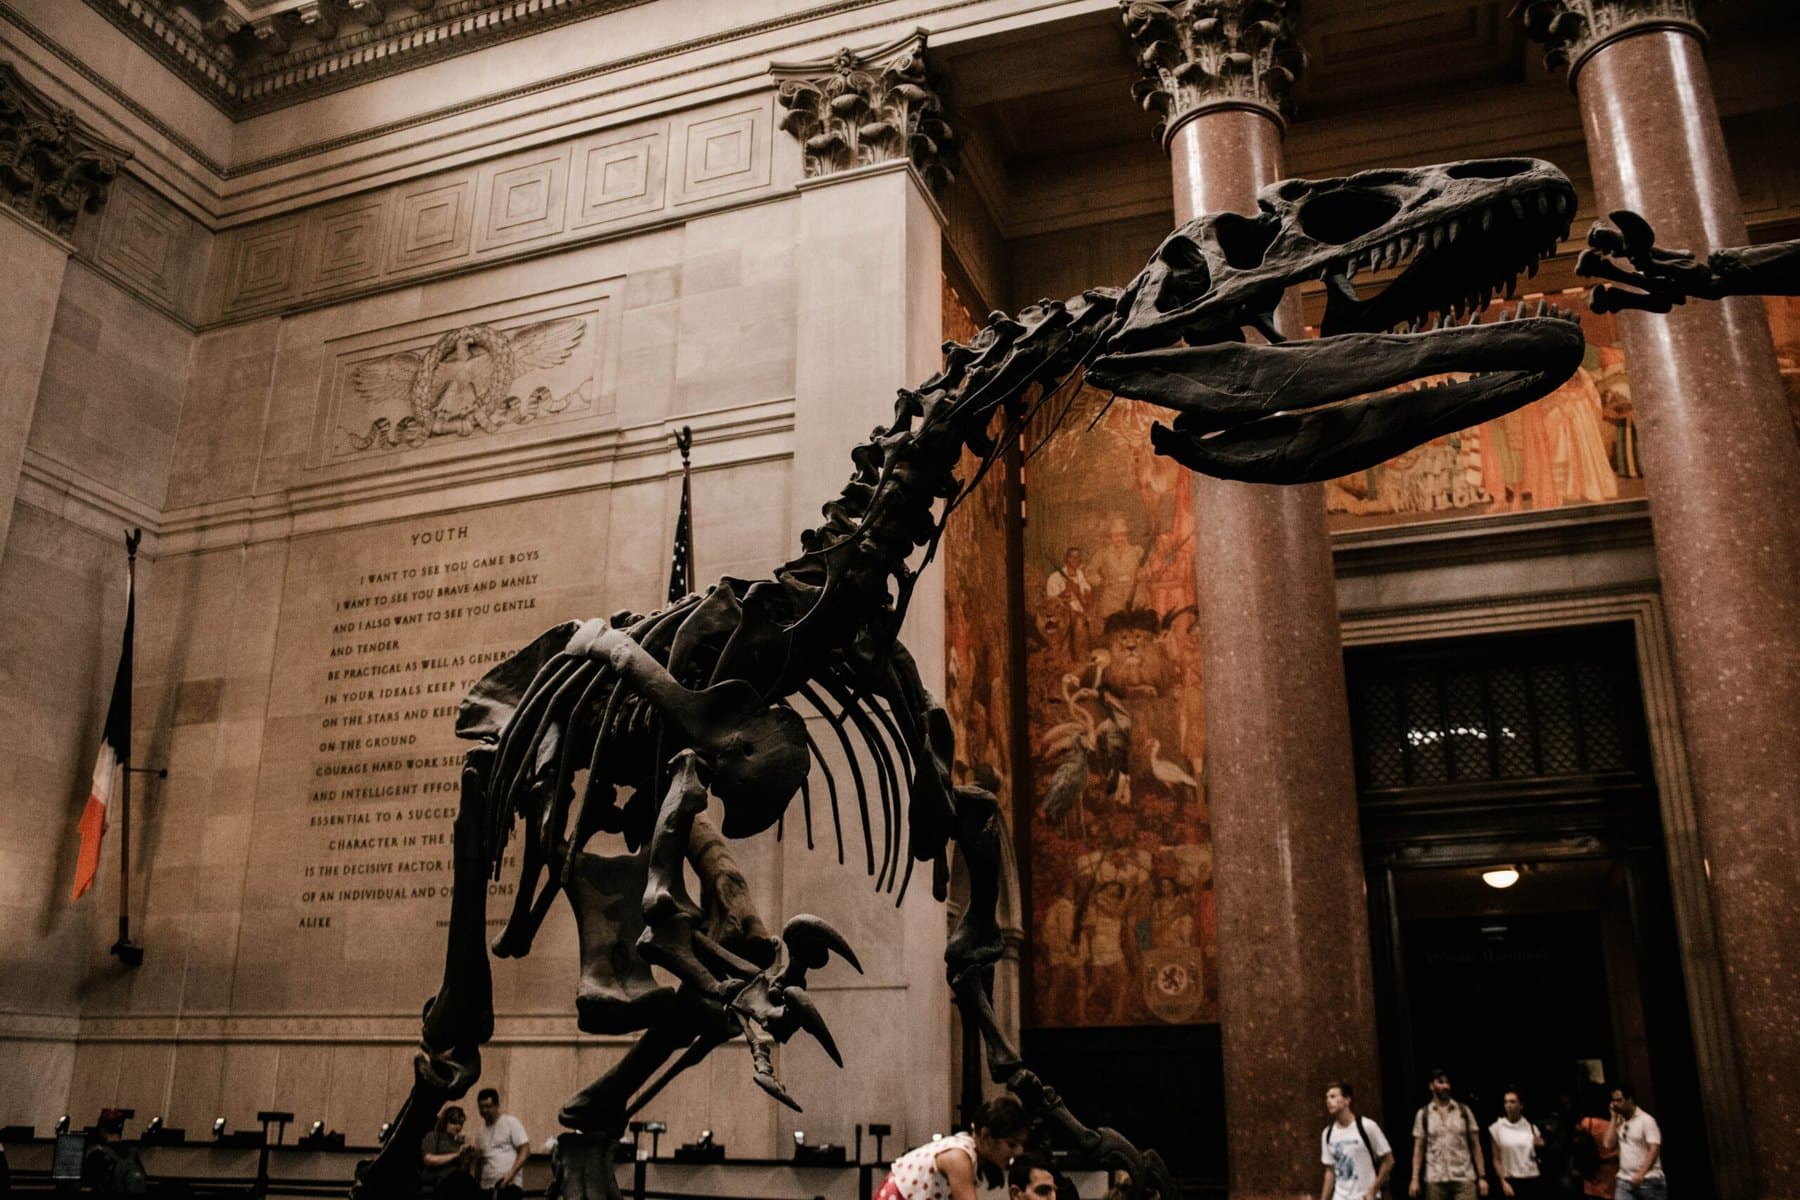 A T-rex skeleton displayed in the American museum of natural history, New York.